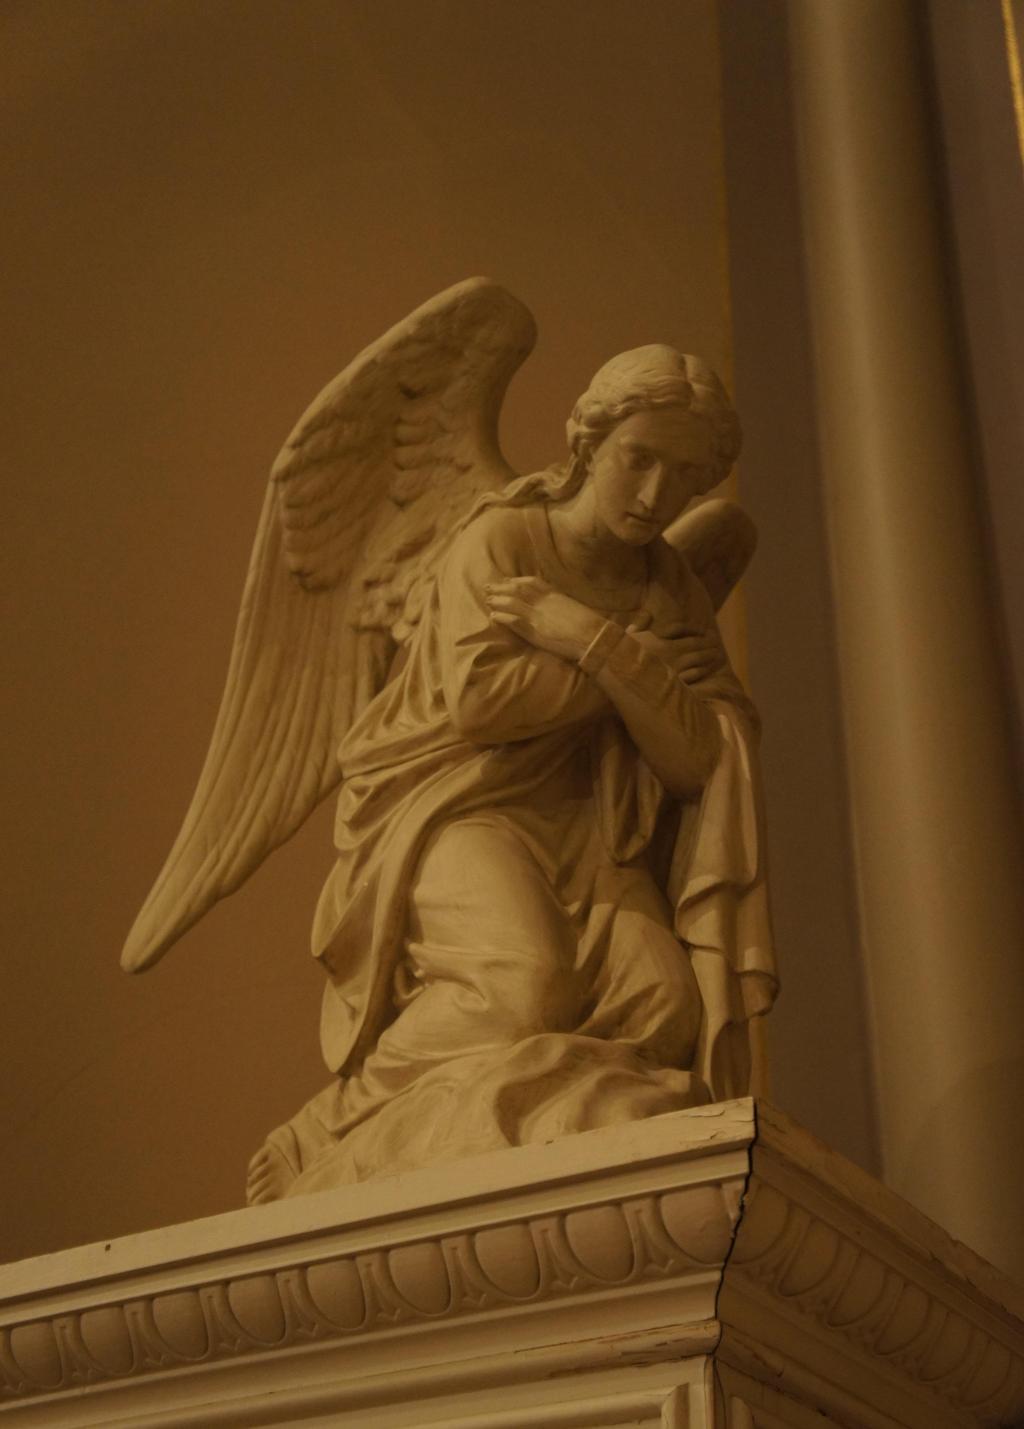 Two angels were originally part of the St. Michael s altar before 1958, but were removed.